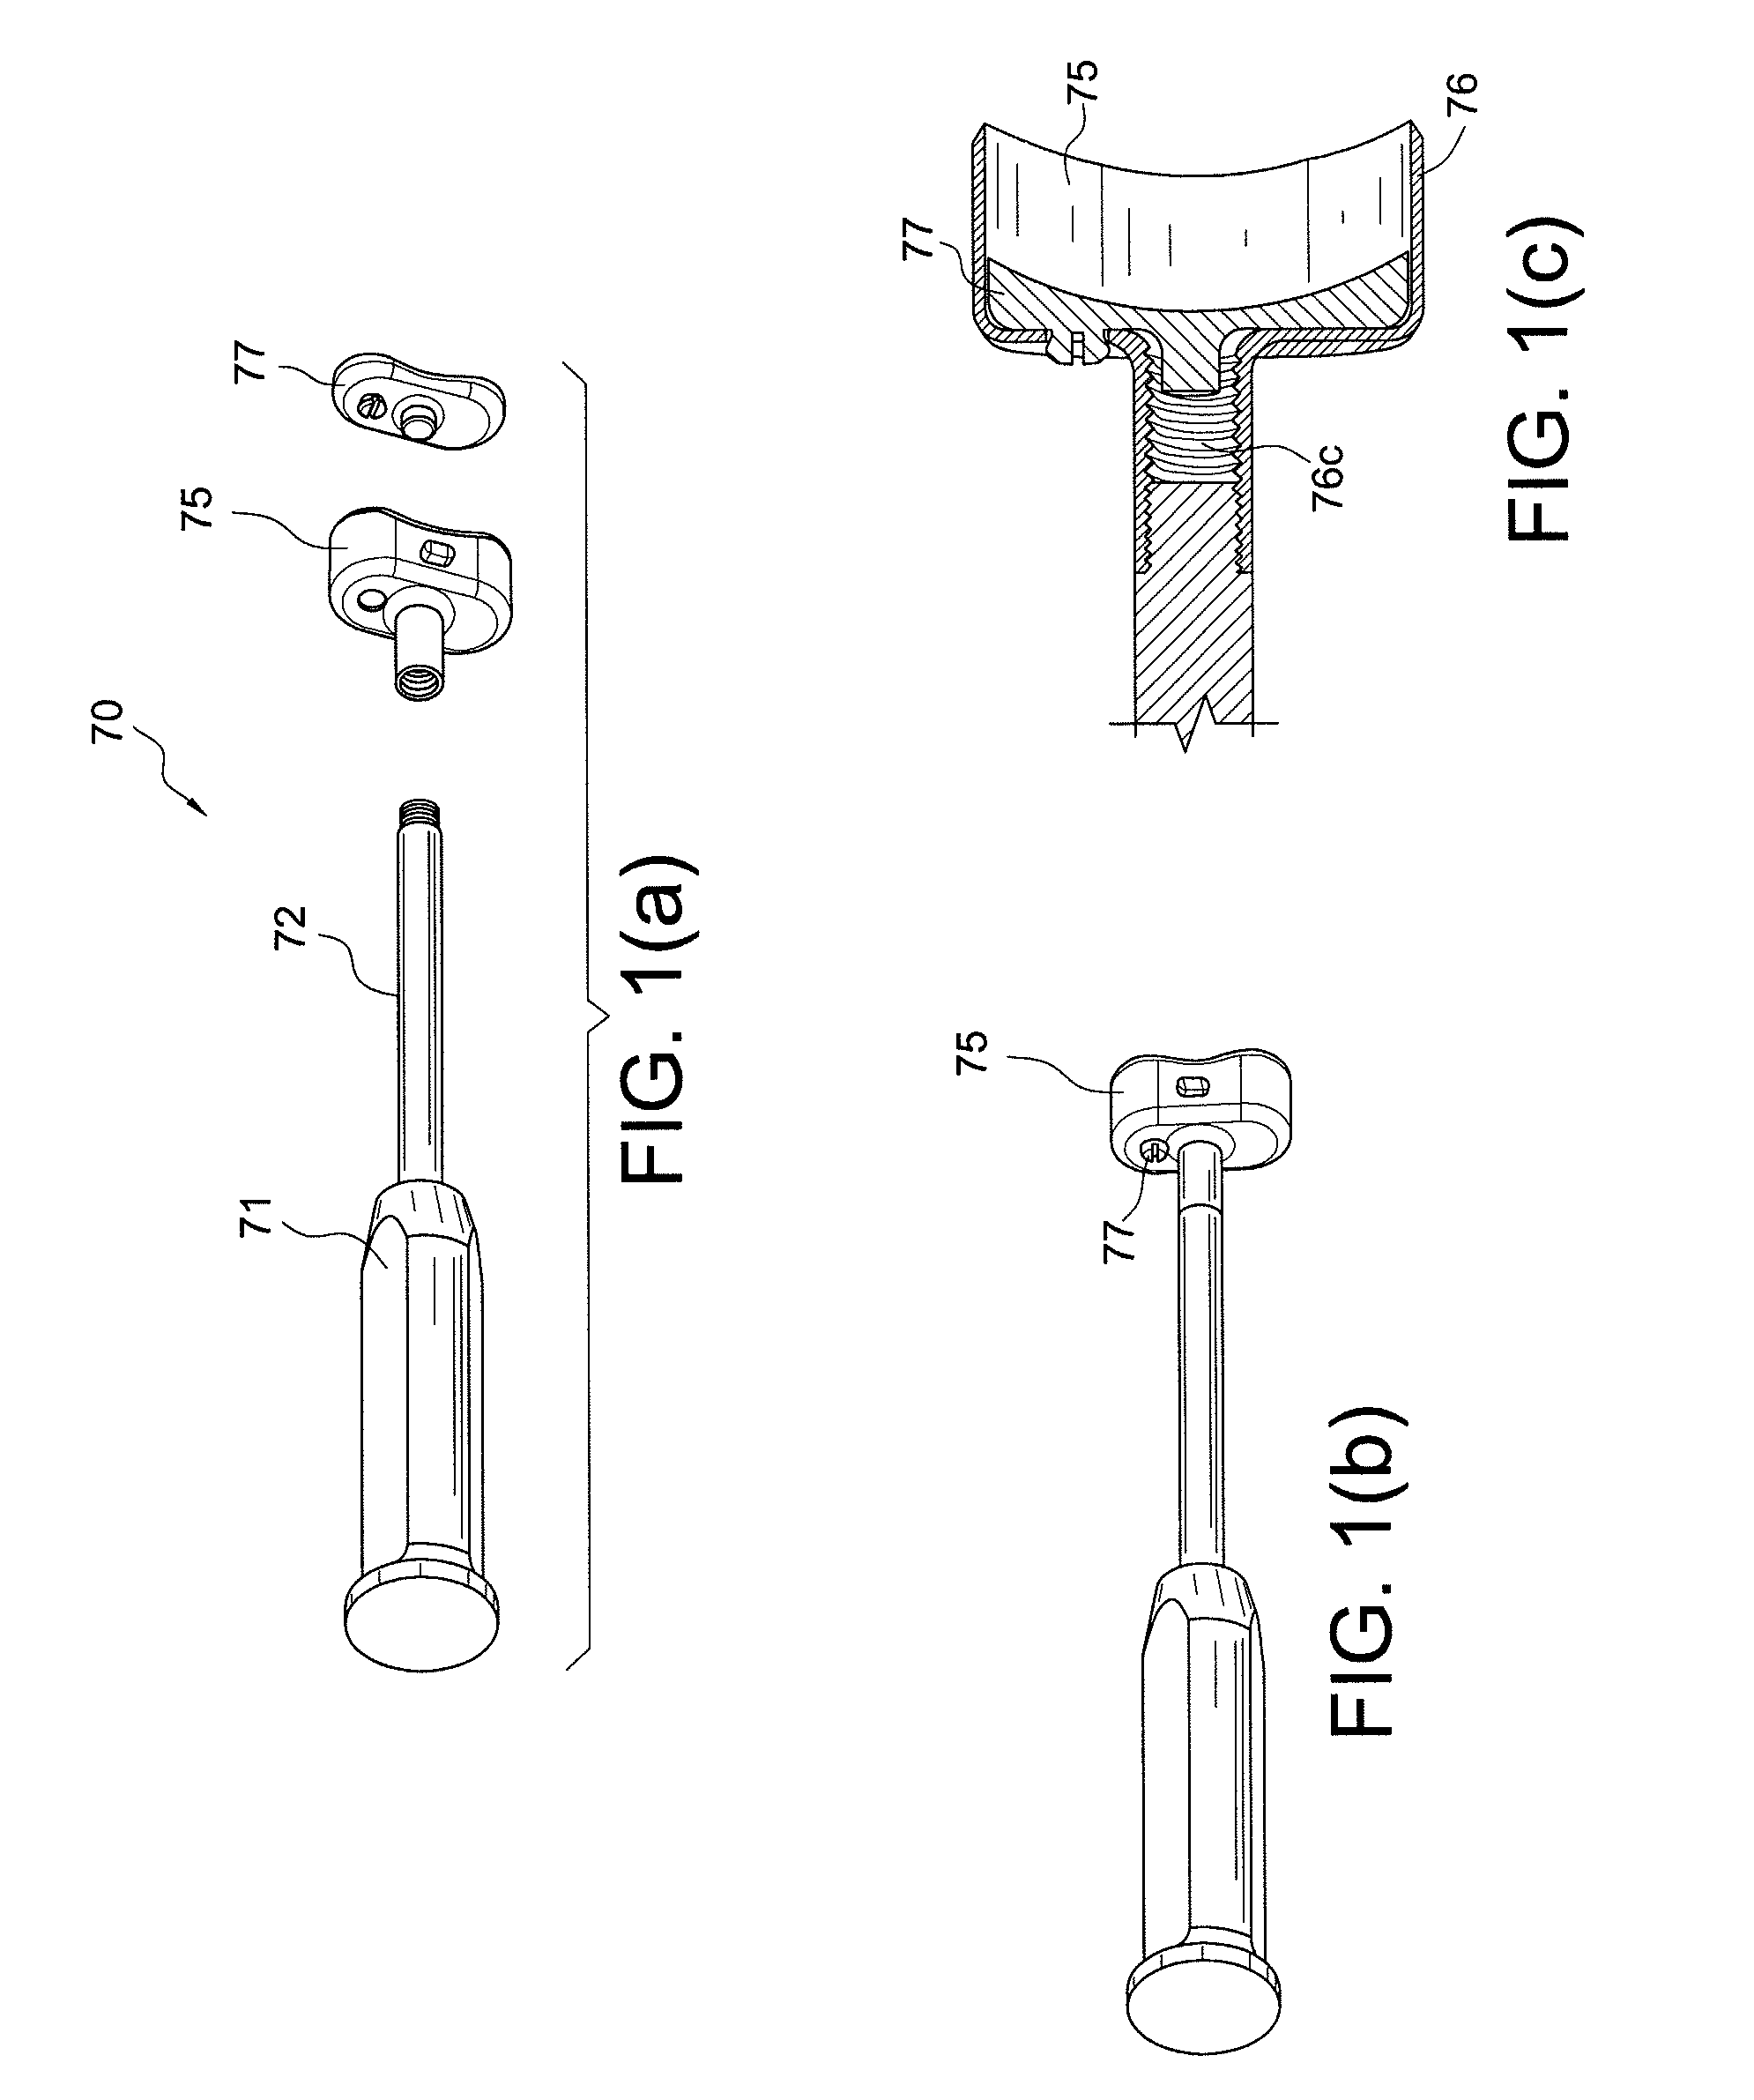 Methods and instruments for forming non-circular cartilage grafts